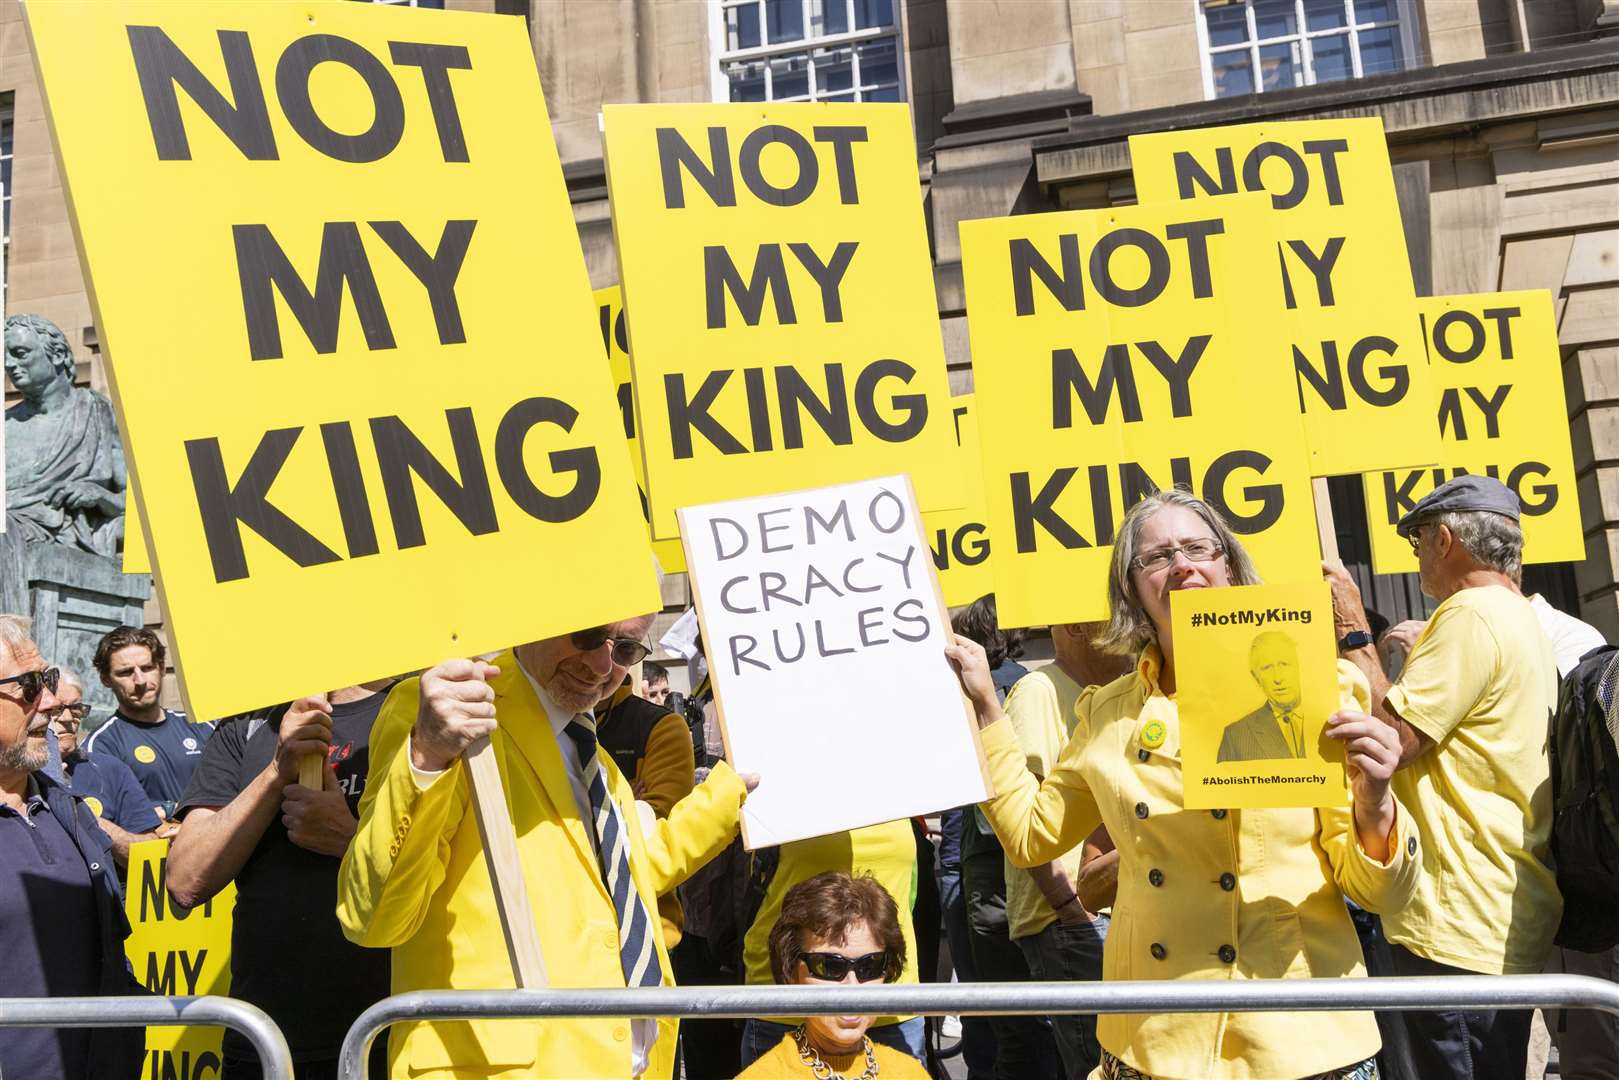 A number of protesters were also present to voice their opposition to the monarchy (Jamie Williamson/Daily Mail/PA)